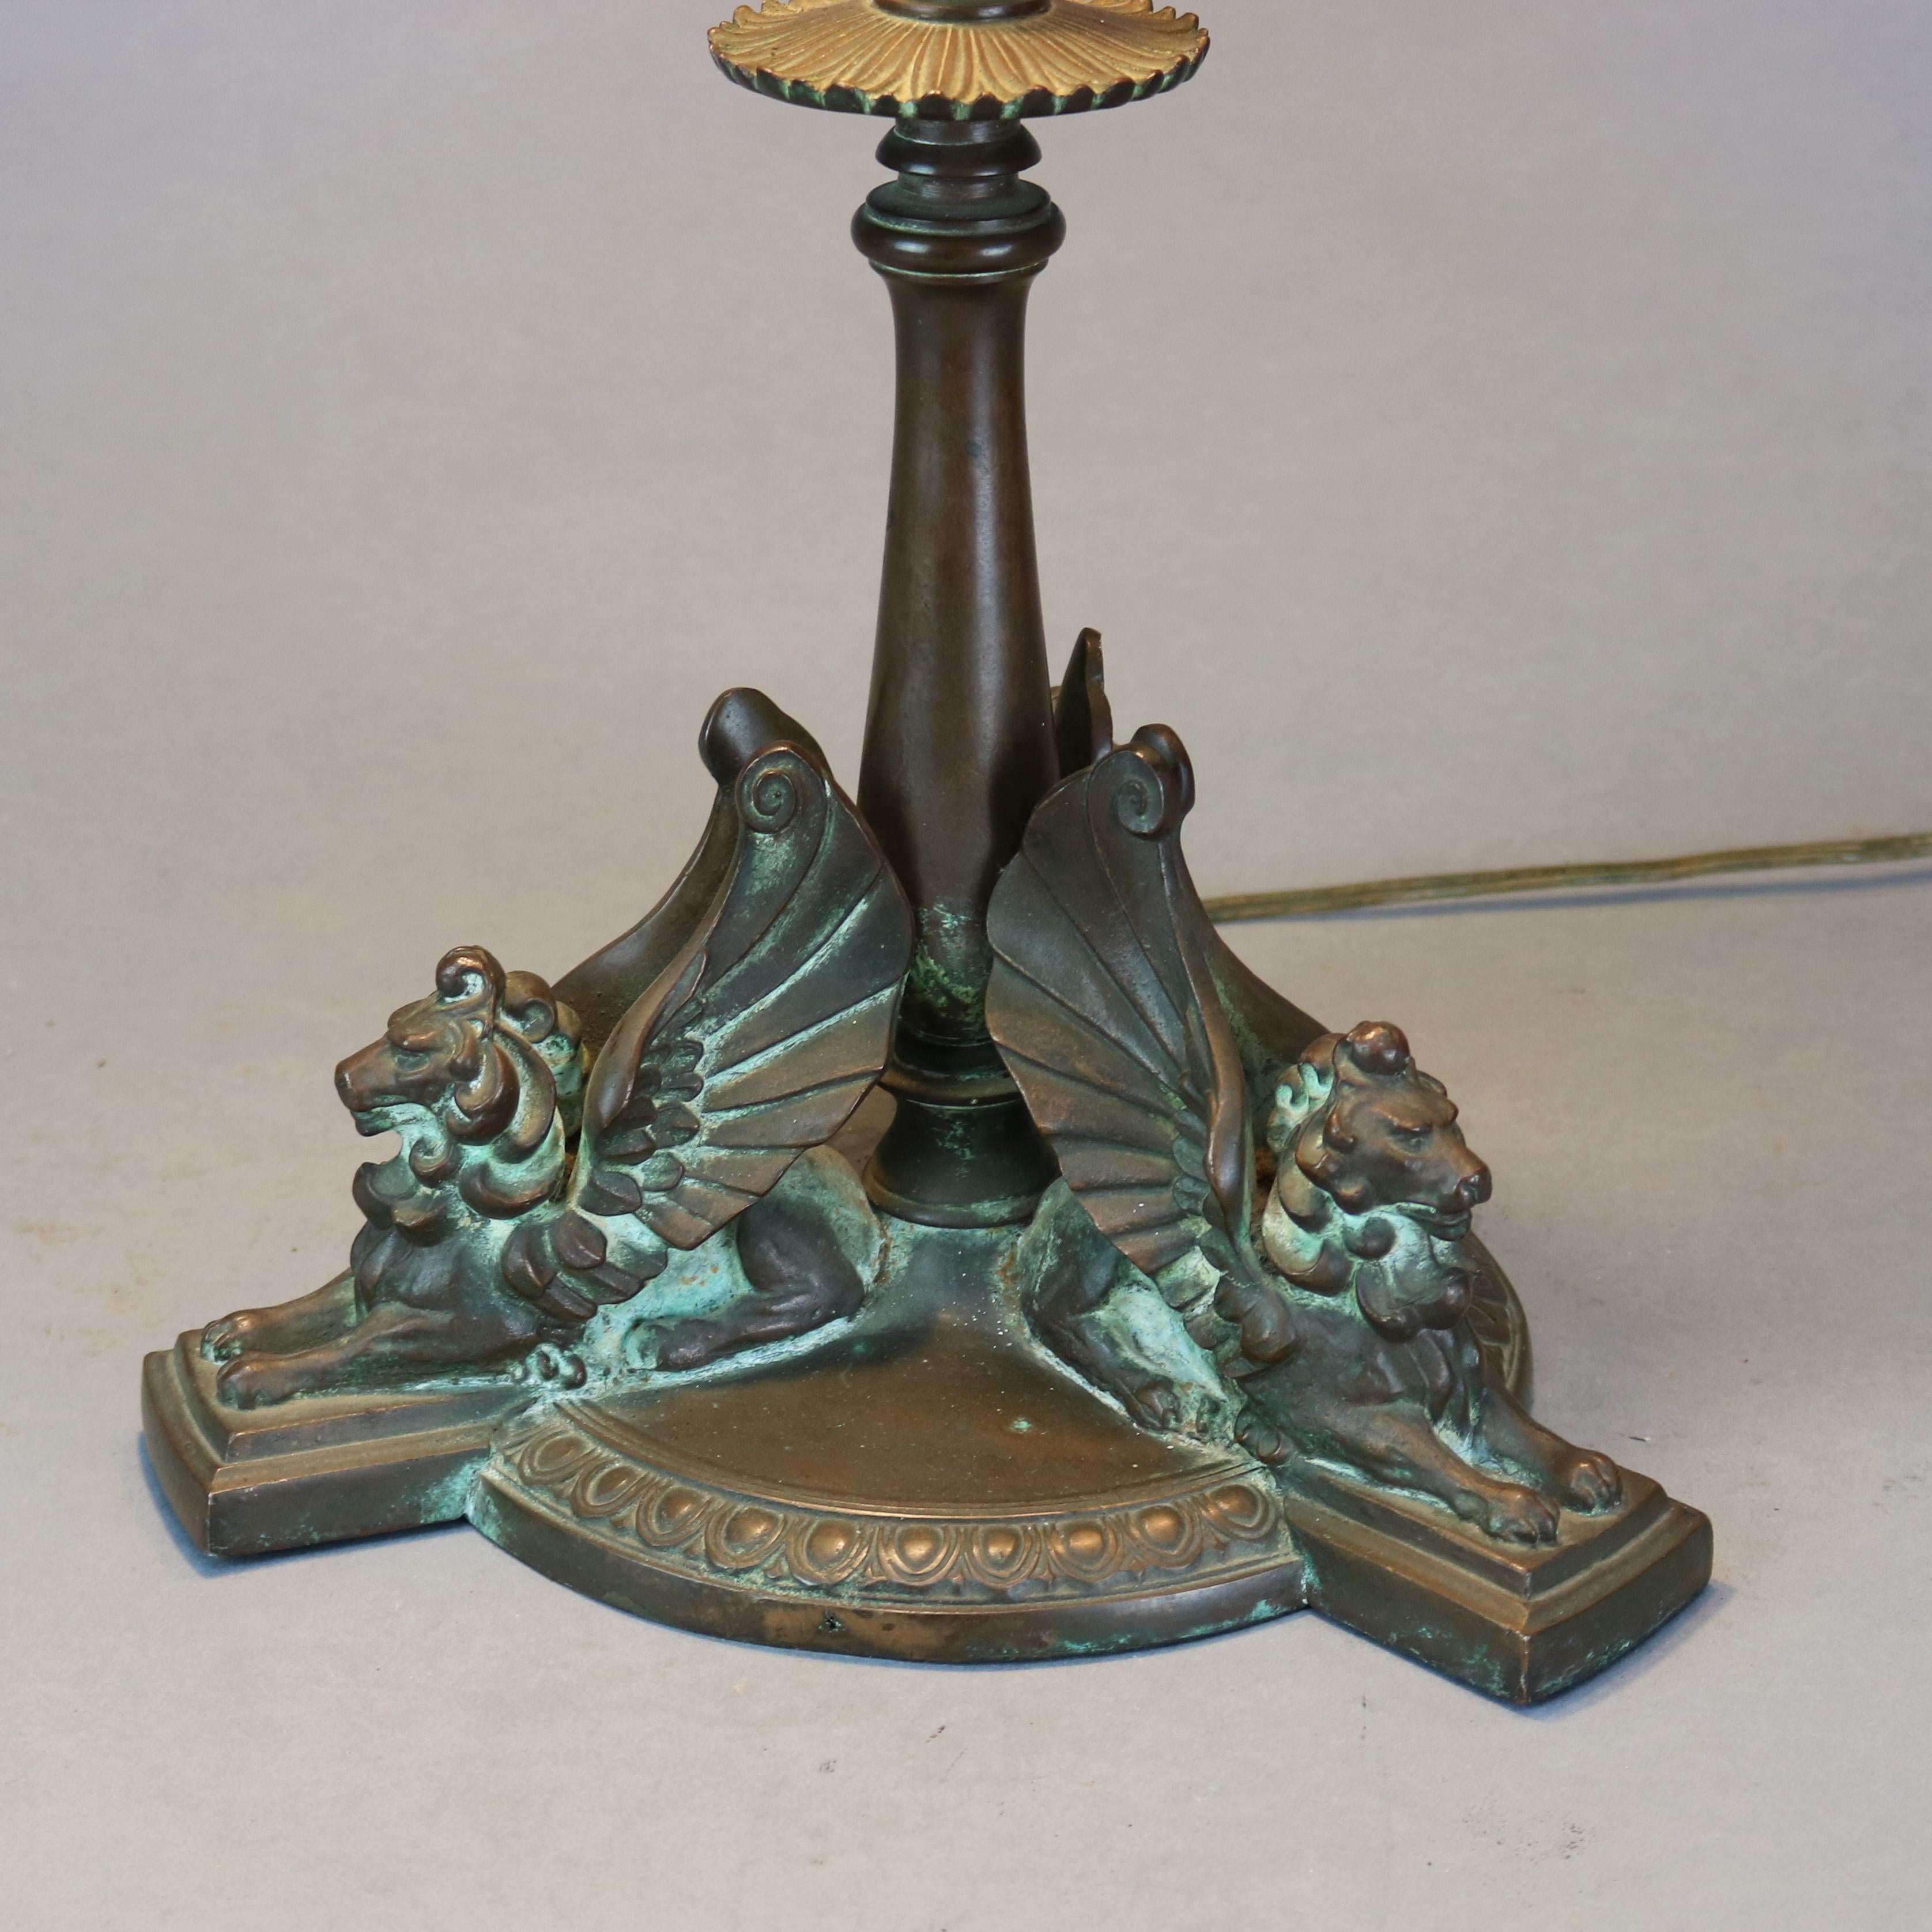 An antique and large Arts and Crafts table lamp by Handel offers mosaic leaded stained glass dome shade with water lily pattern surmounting figural base having sculptural winged lions or griffins (referenced on page 140 of 